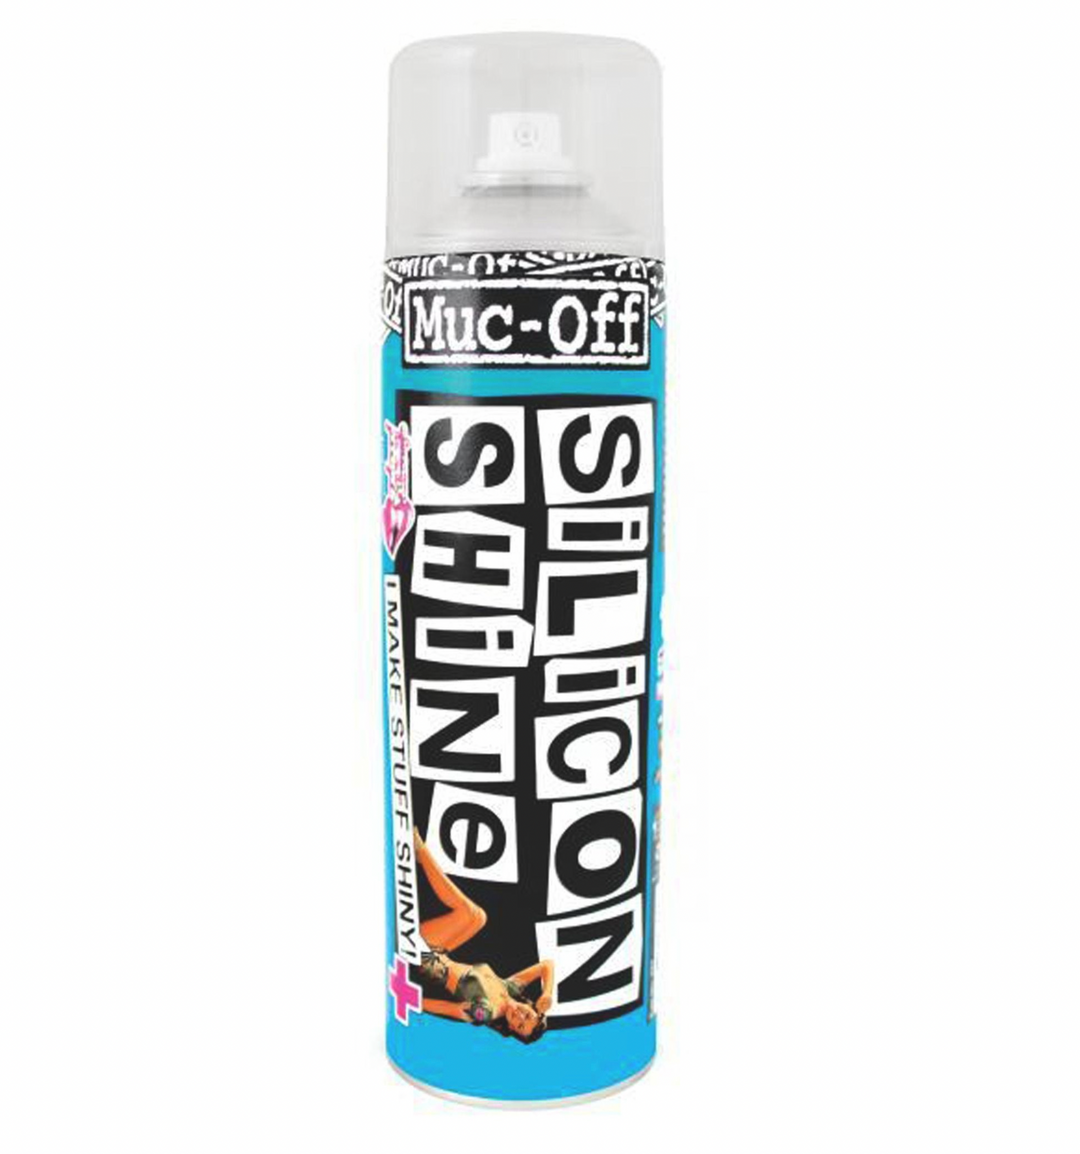 MUC-OFF PROTECT SILICON SHINE 500ML - Mackay Cycles - [product_SKU] - Muc-Off